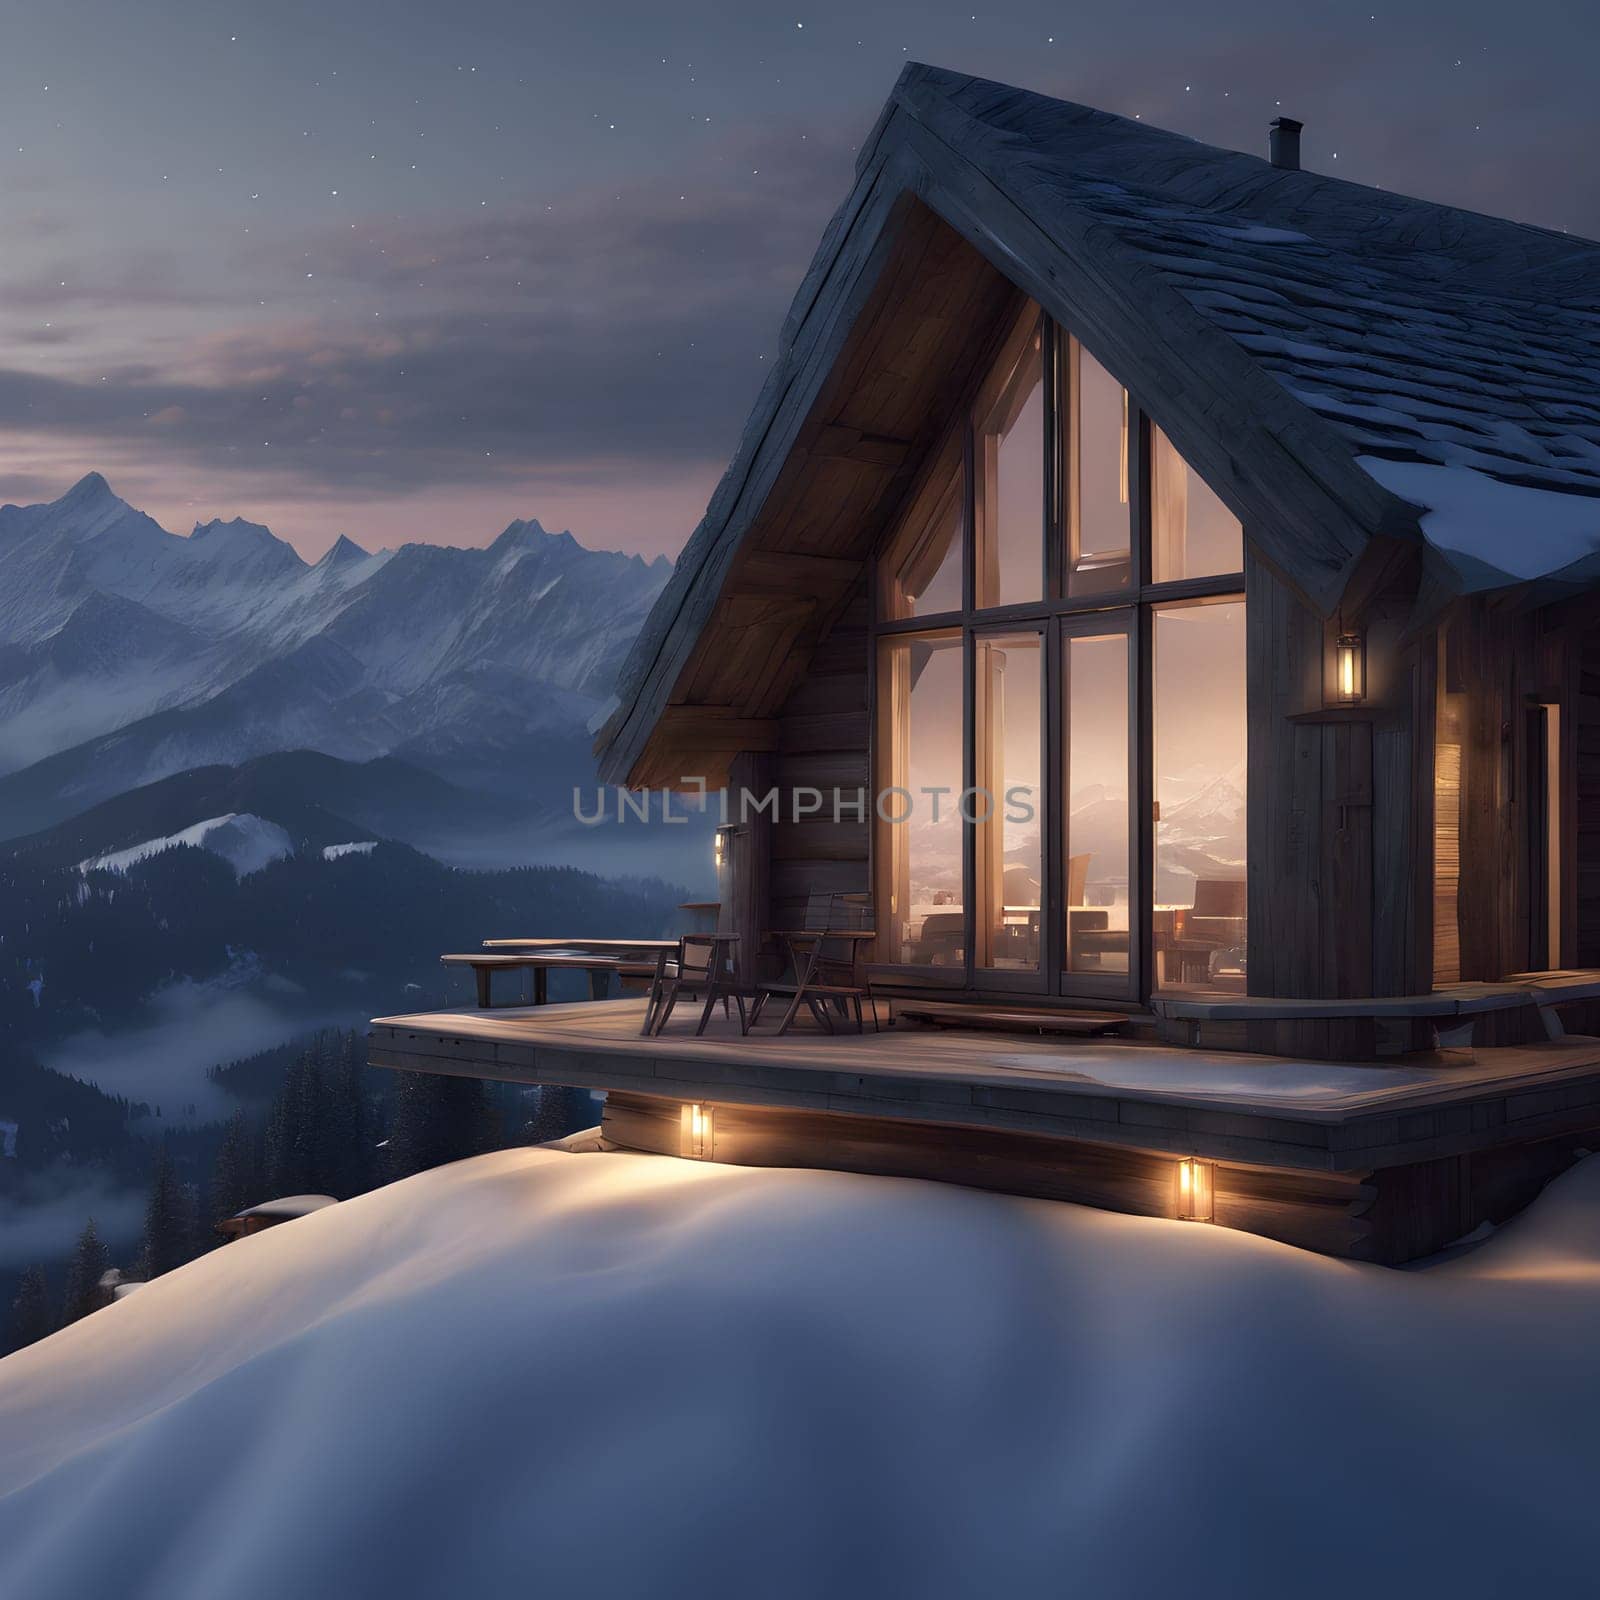 Alpine Escapes: Rustic Mountain Houses in a Snowy Wilderness by Petrichor